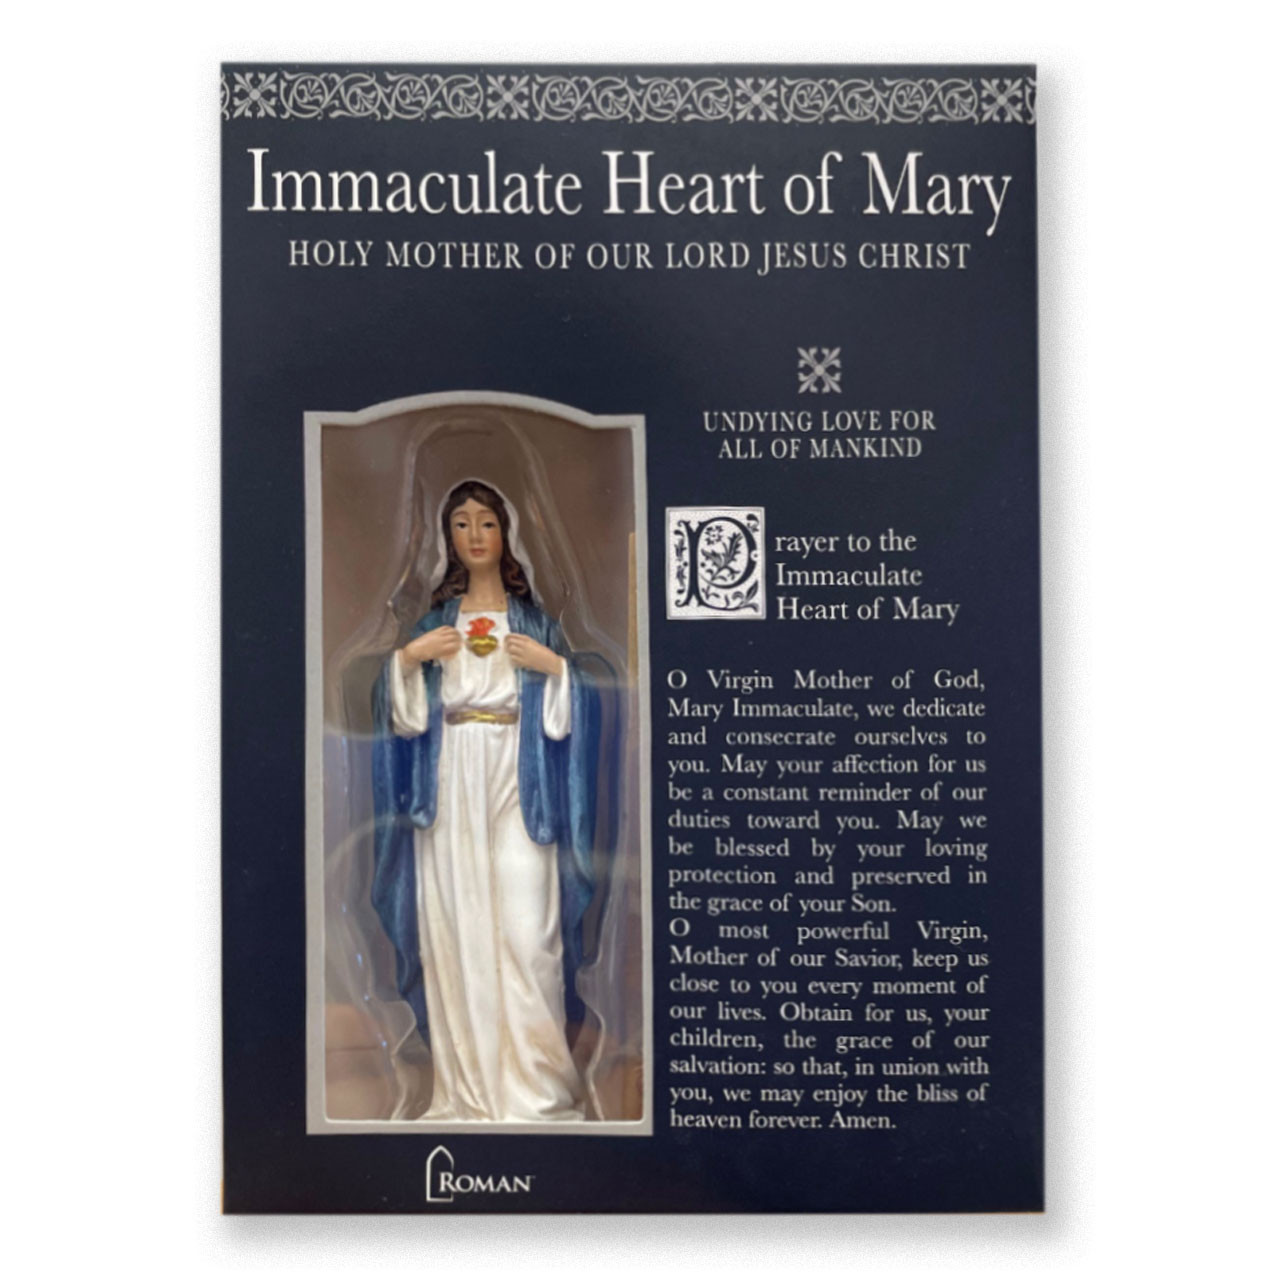 Box front of the Immaculate Heart of Mary Statue and prayer card